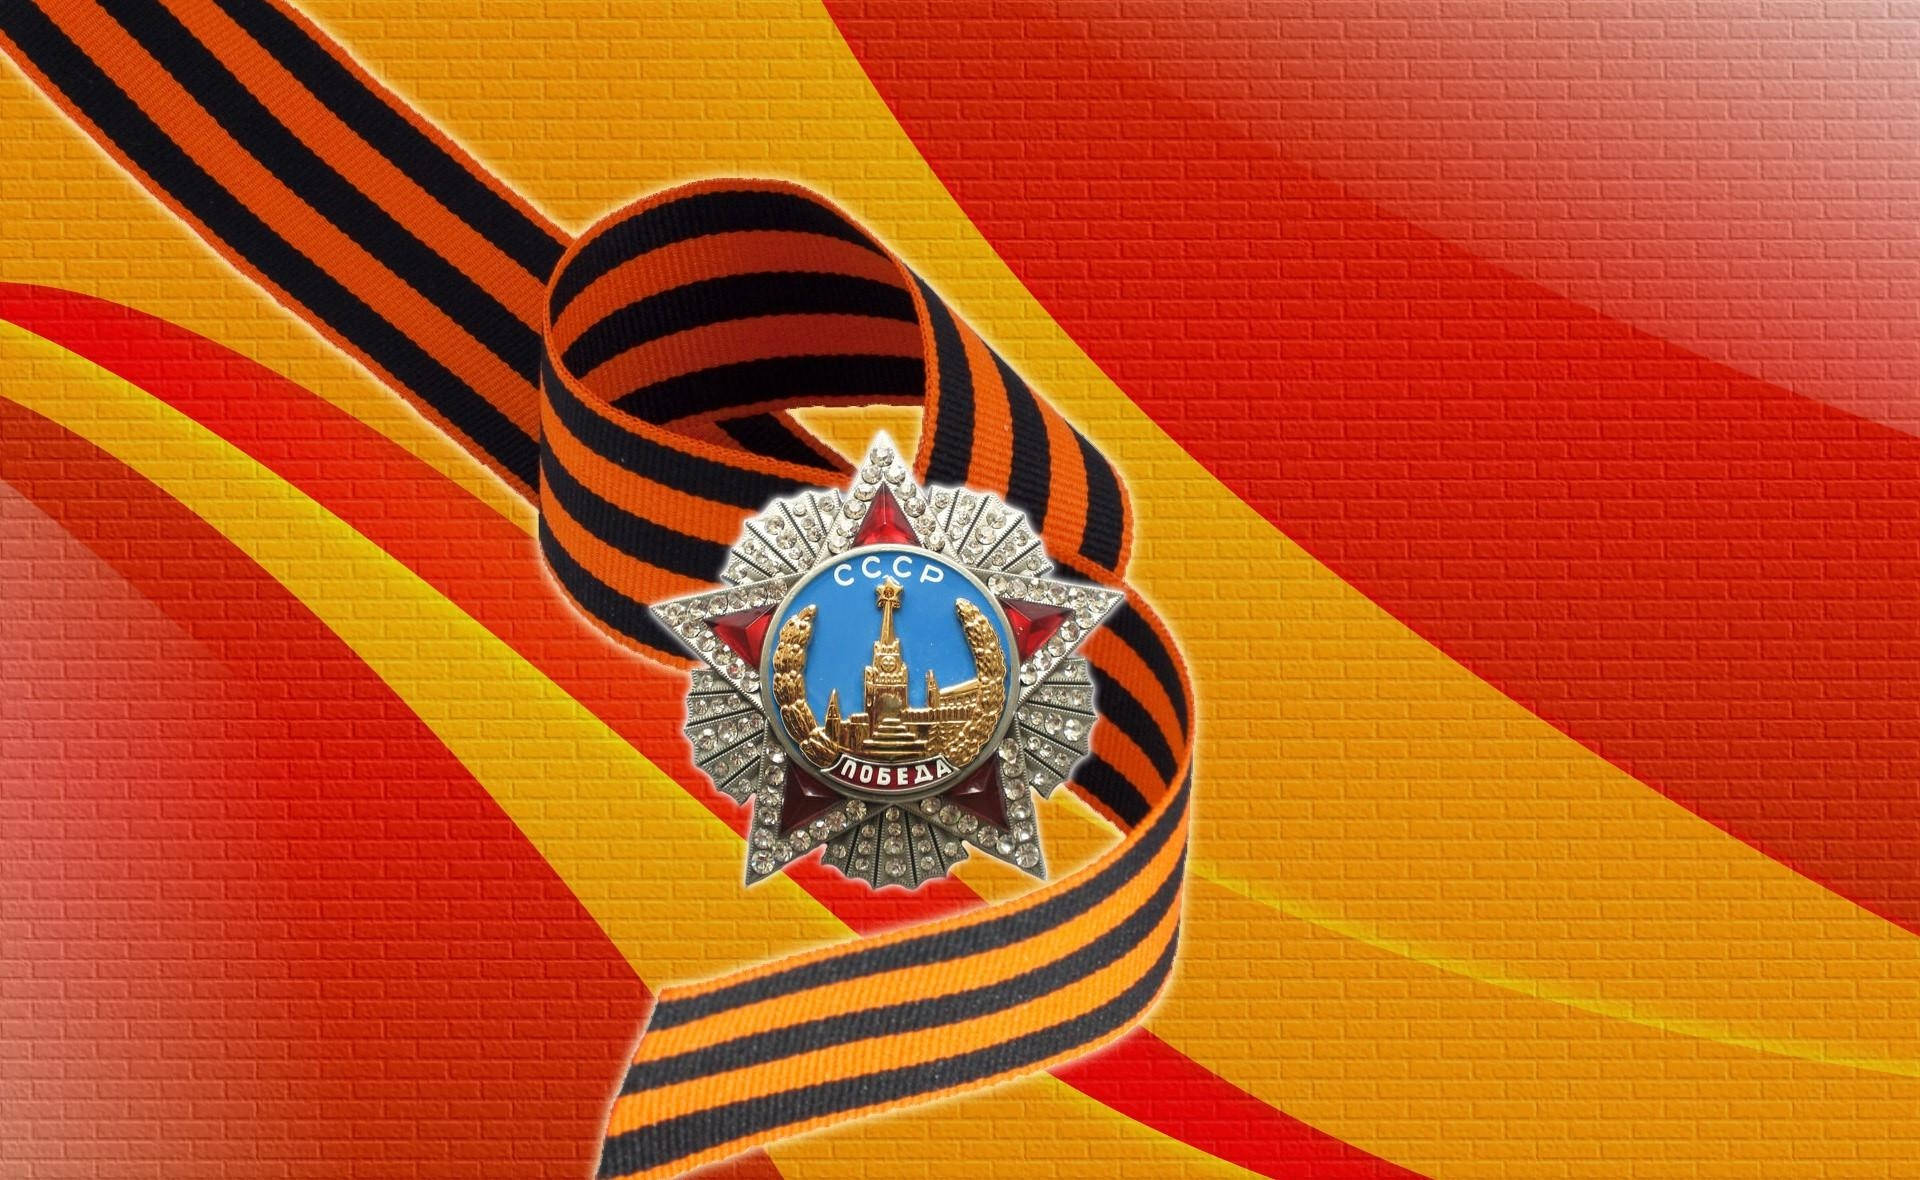 May Soviet Order Of Victory